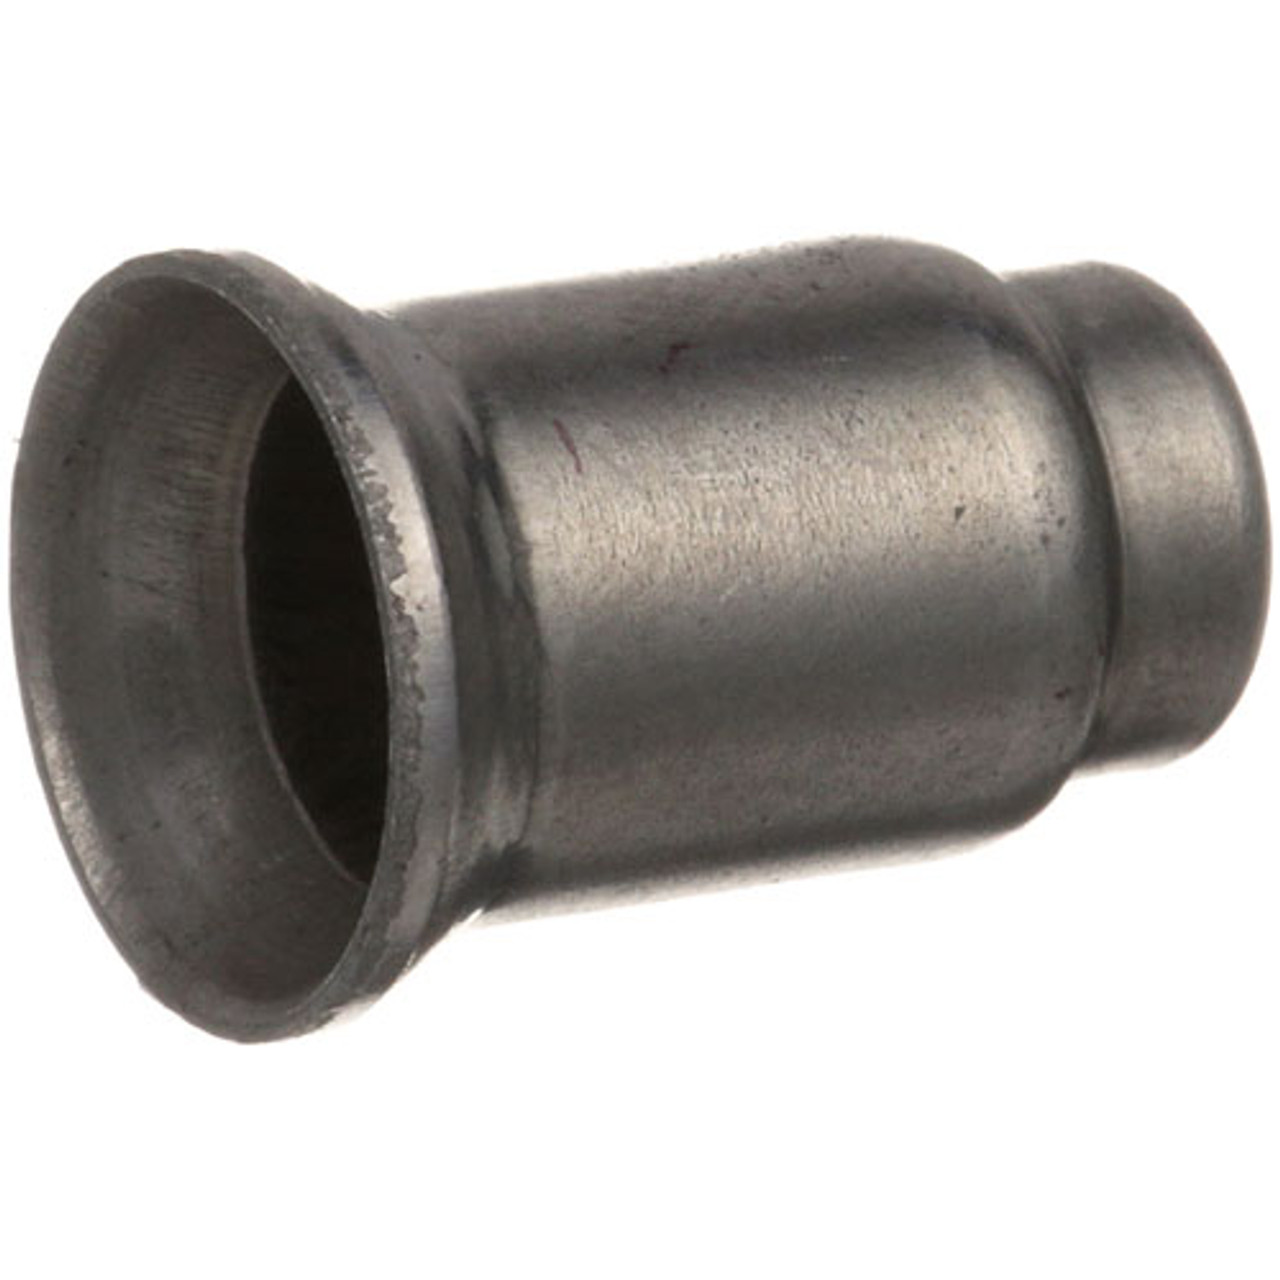 Pilot Orifice .010 - Replacement Part For Star Mfg 2A-45352